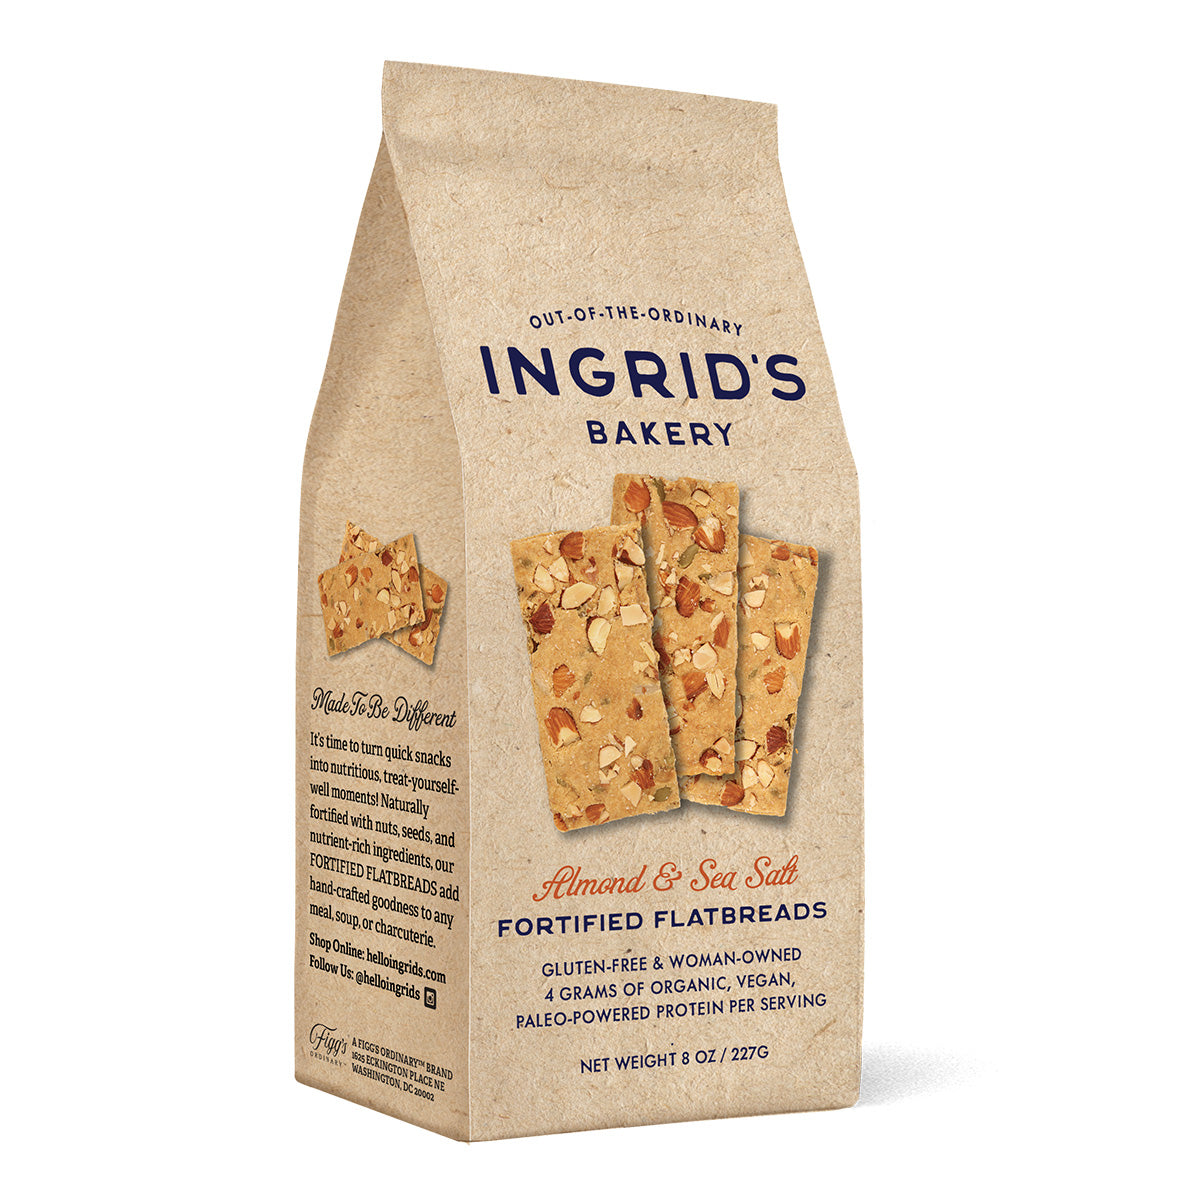 Graphic of the Almond & Sea Salt fortified flatbread packaging front